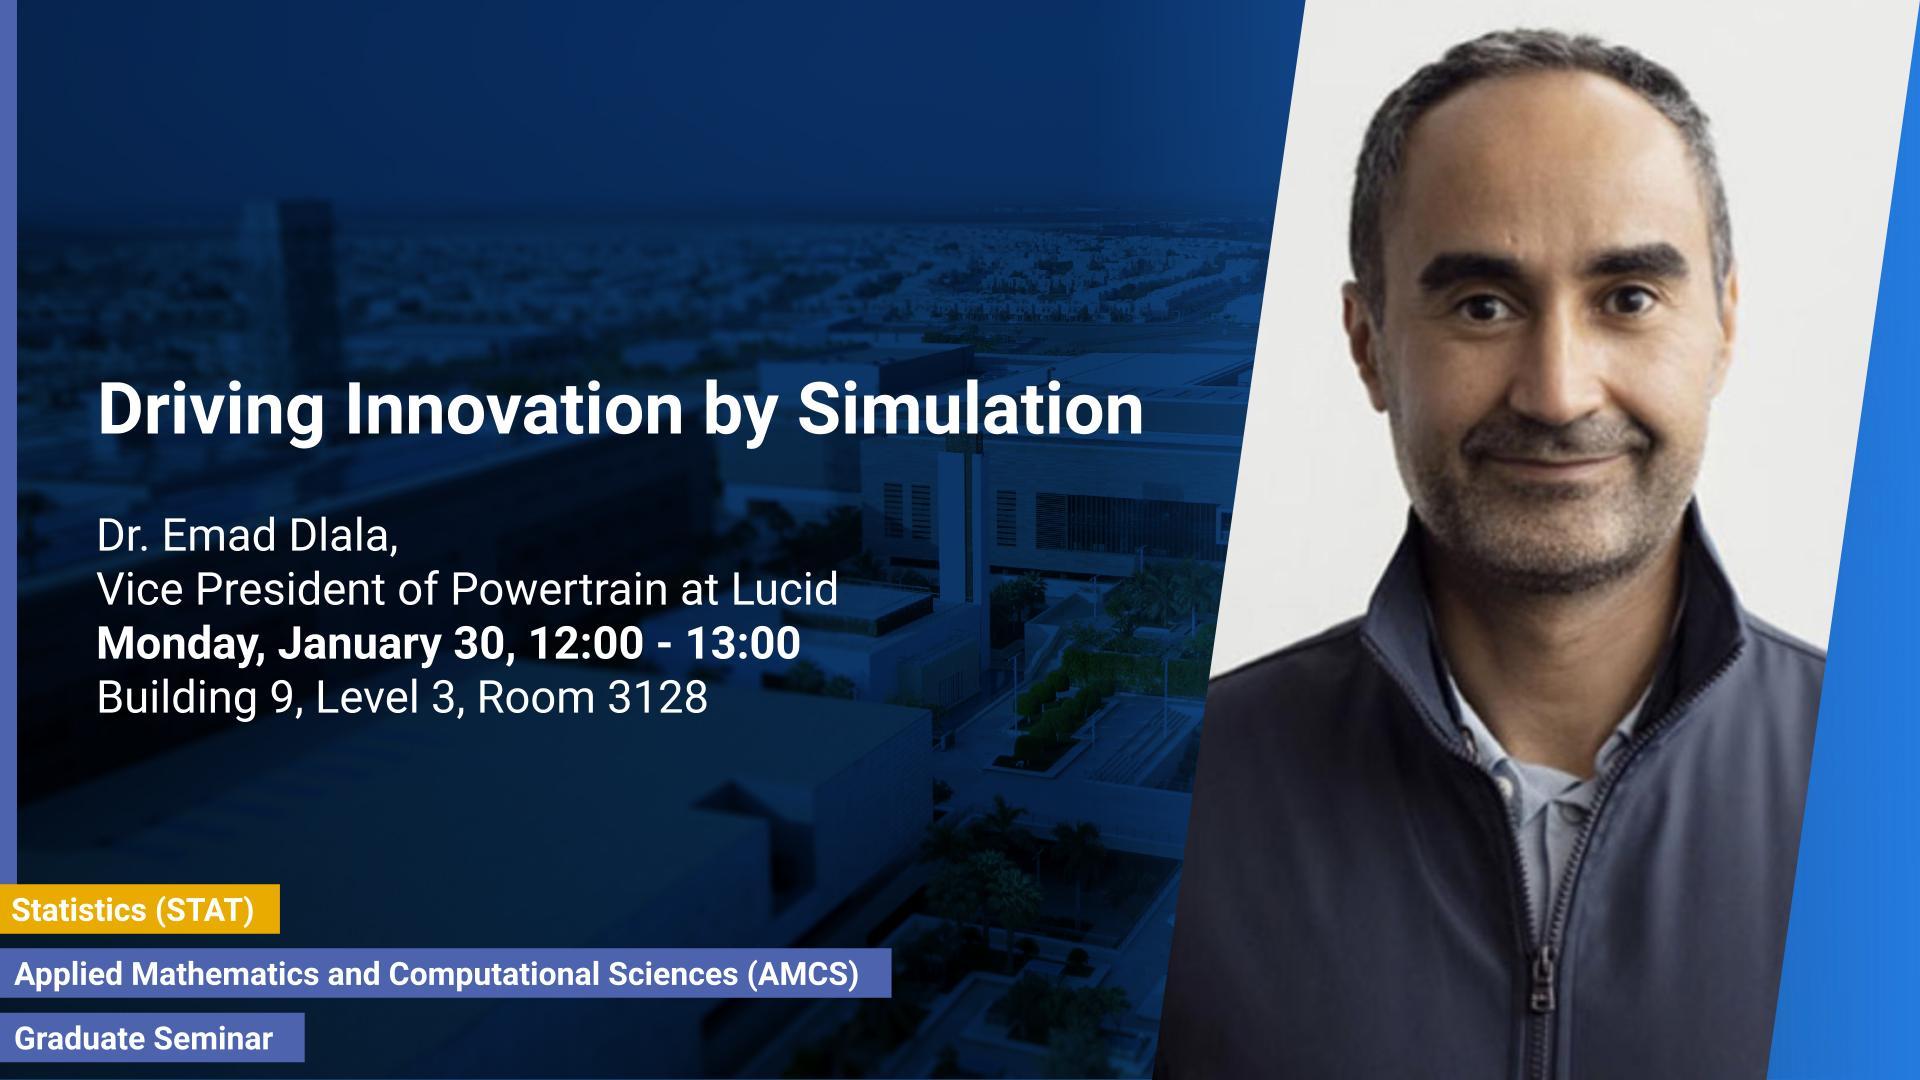 KAUST-CEMSE-AMCS-STAT-Graduate Seminar-Dr. Emad Dlala-Driving Innovation -by Simulation